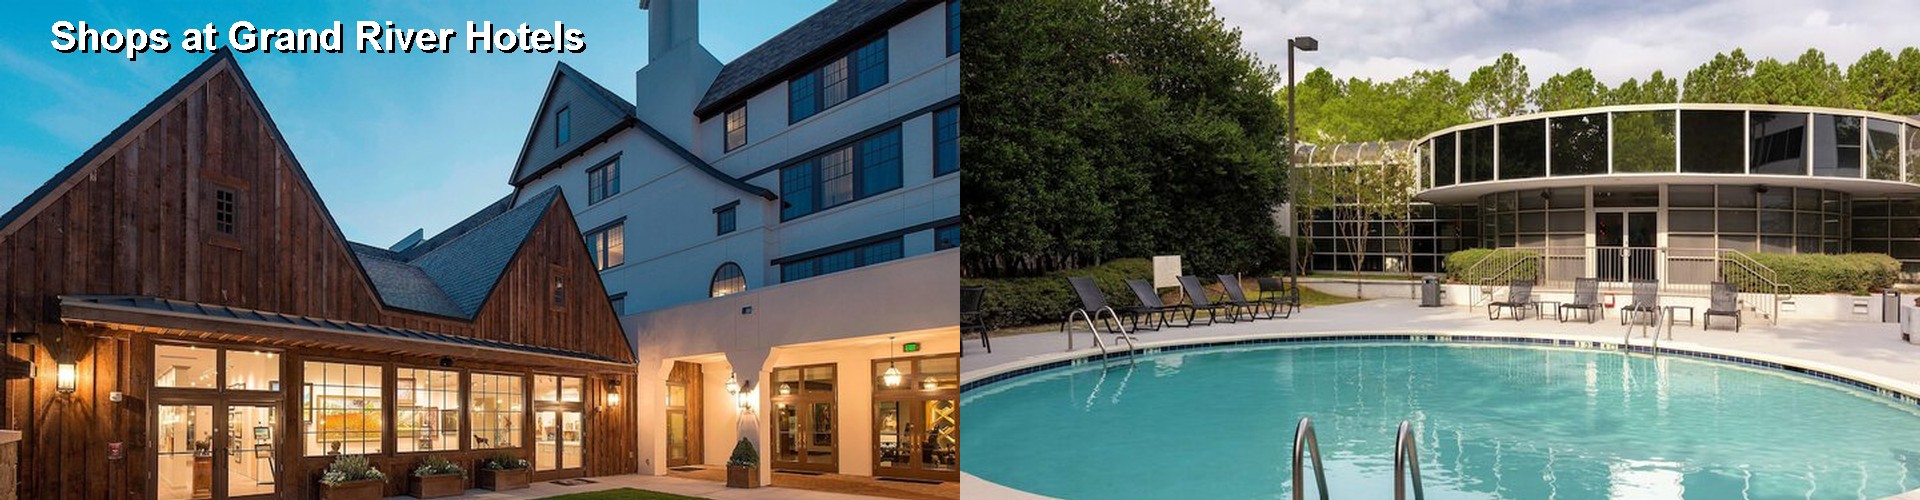 5 Best Hotels near Shops at Grand River